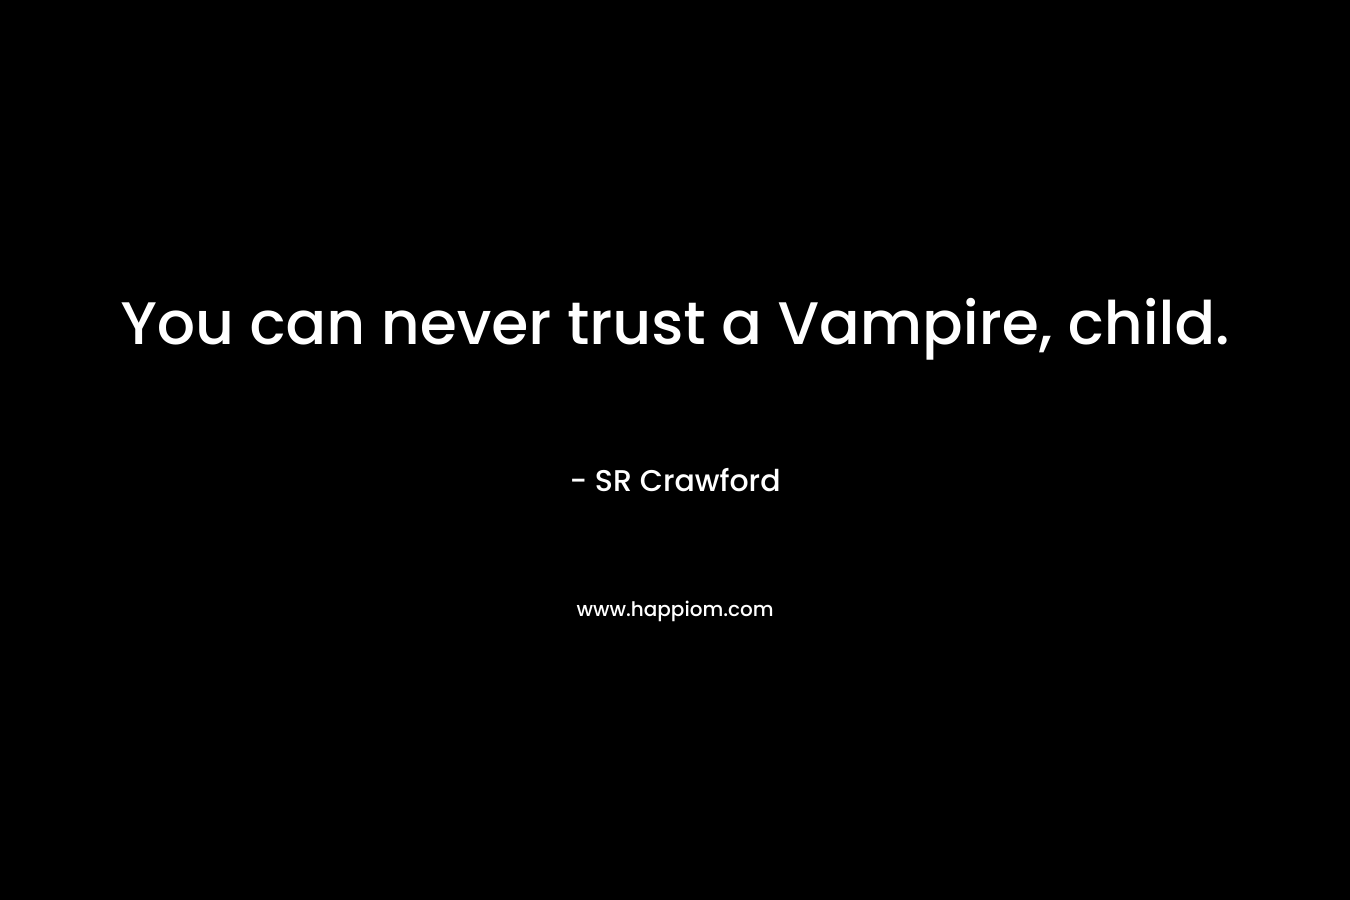 You can never trust a Vampire, child.